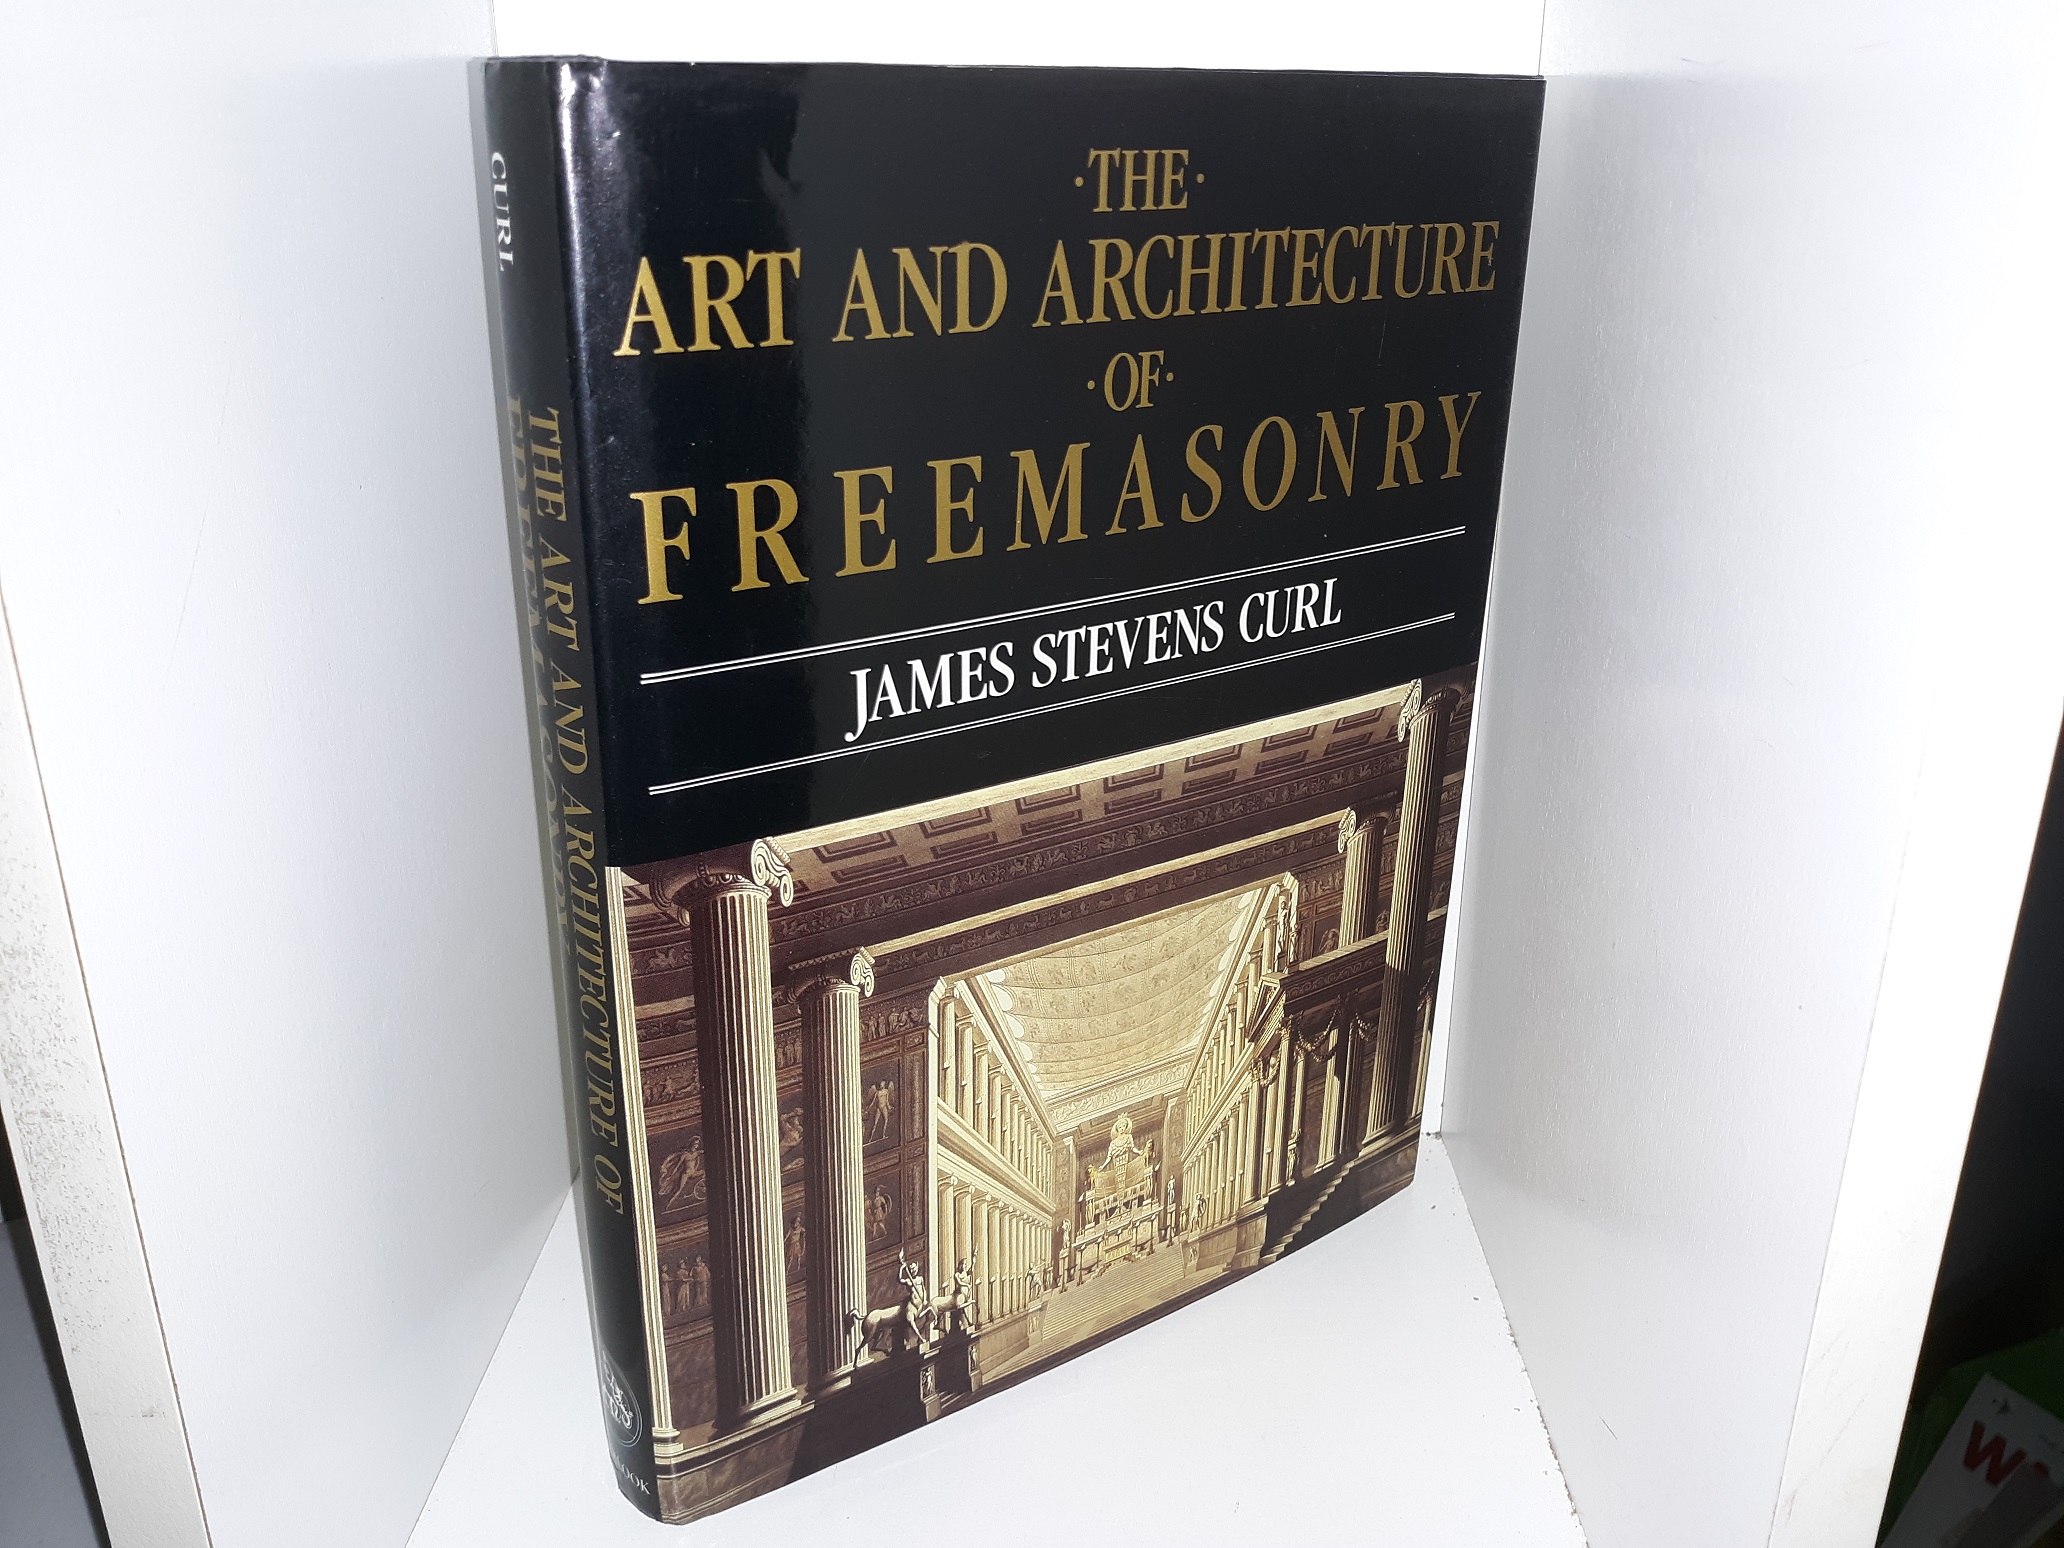 The Art and Architecture of Freemasonry (1993) ~ by James Stevens Curl